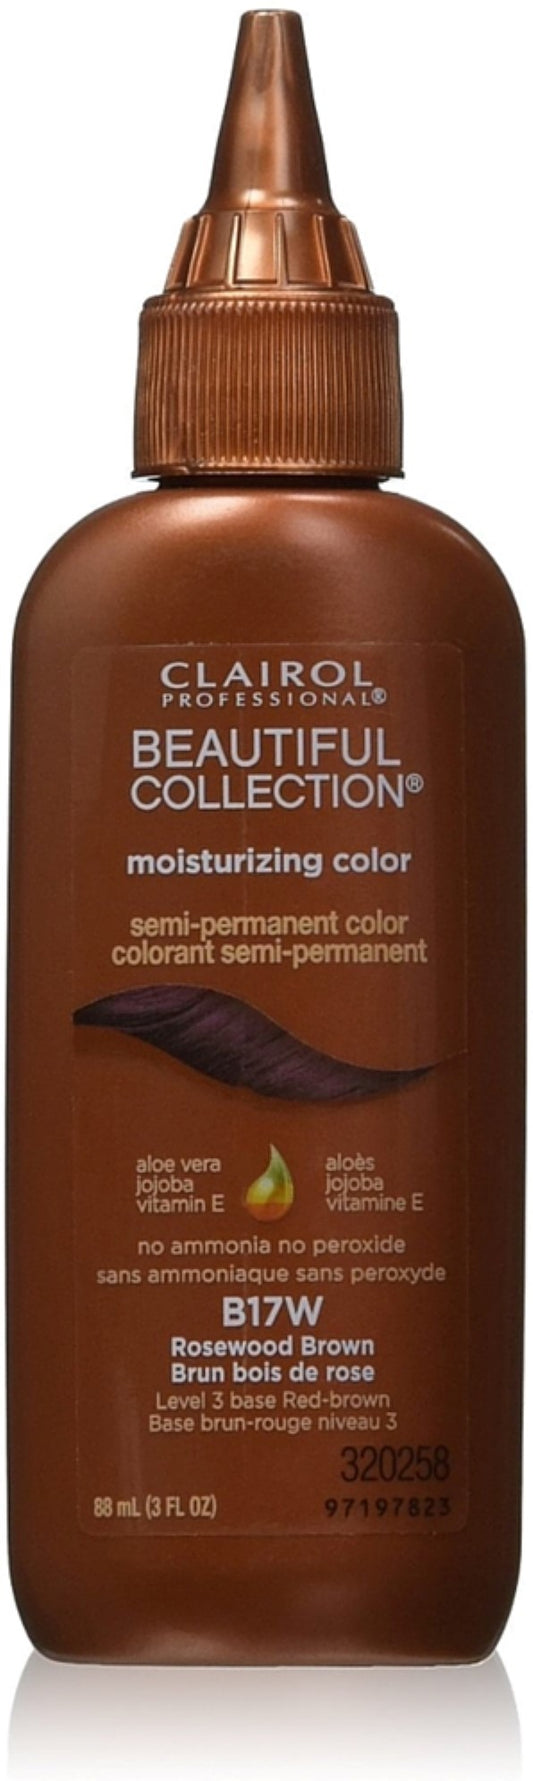 Clairol Beautiful Collections B17W